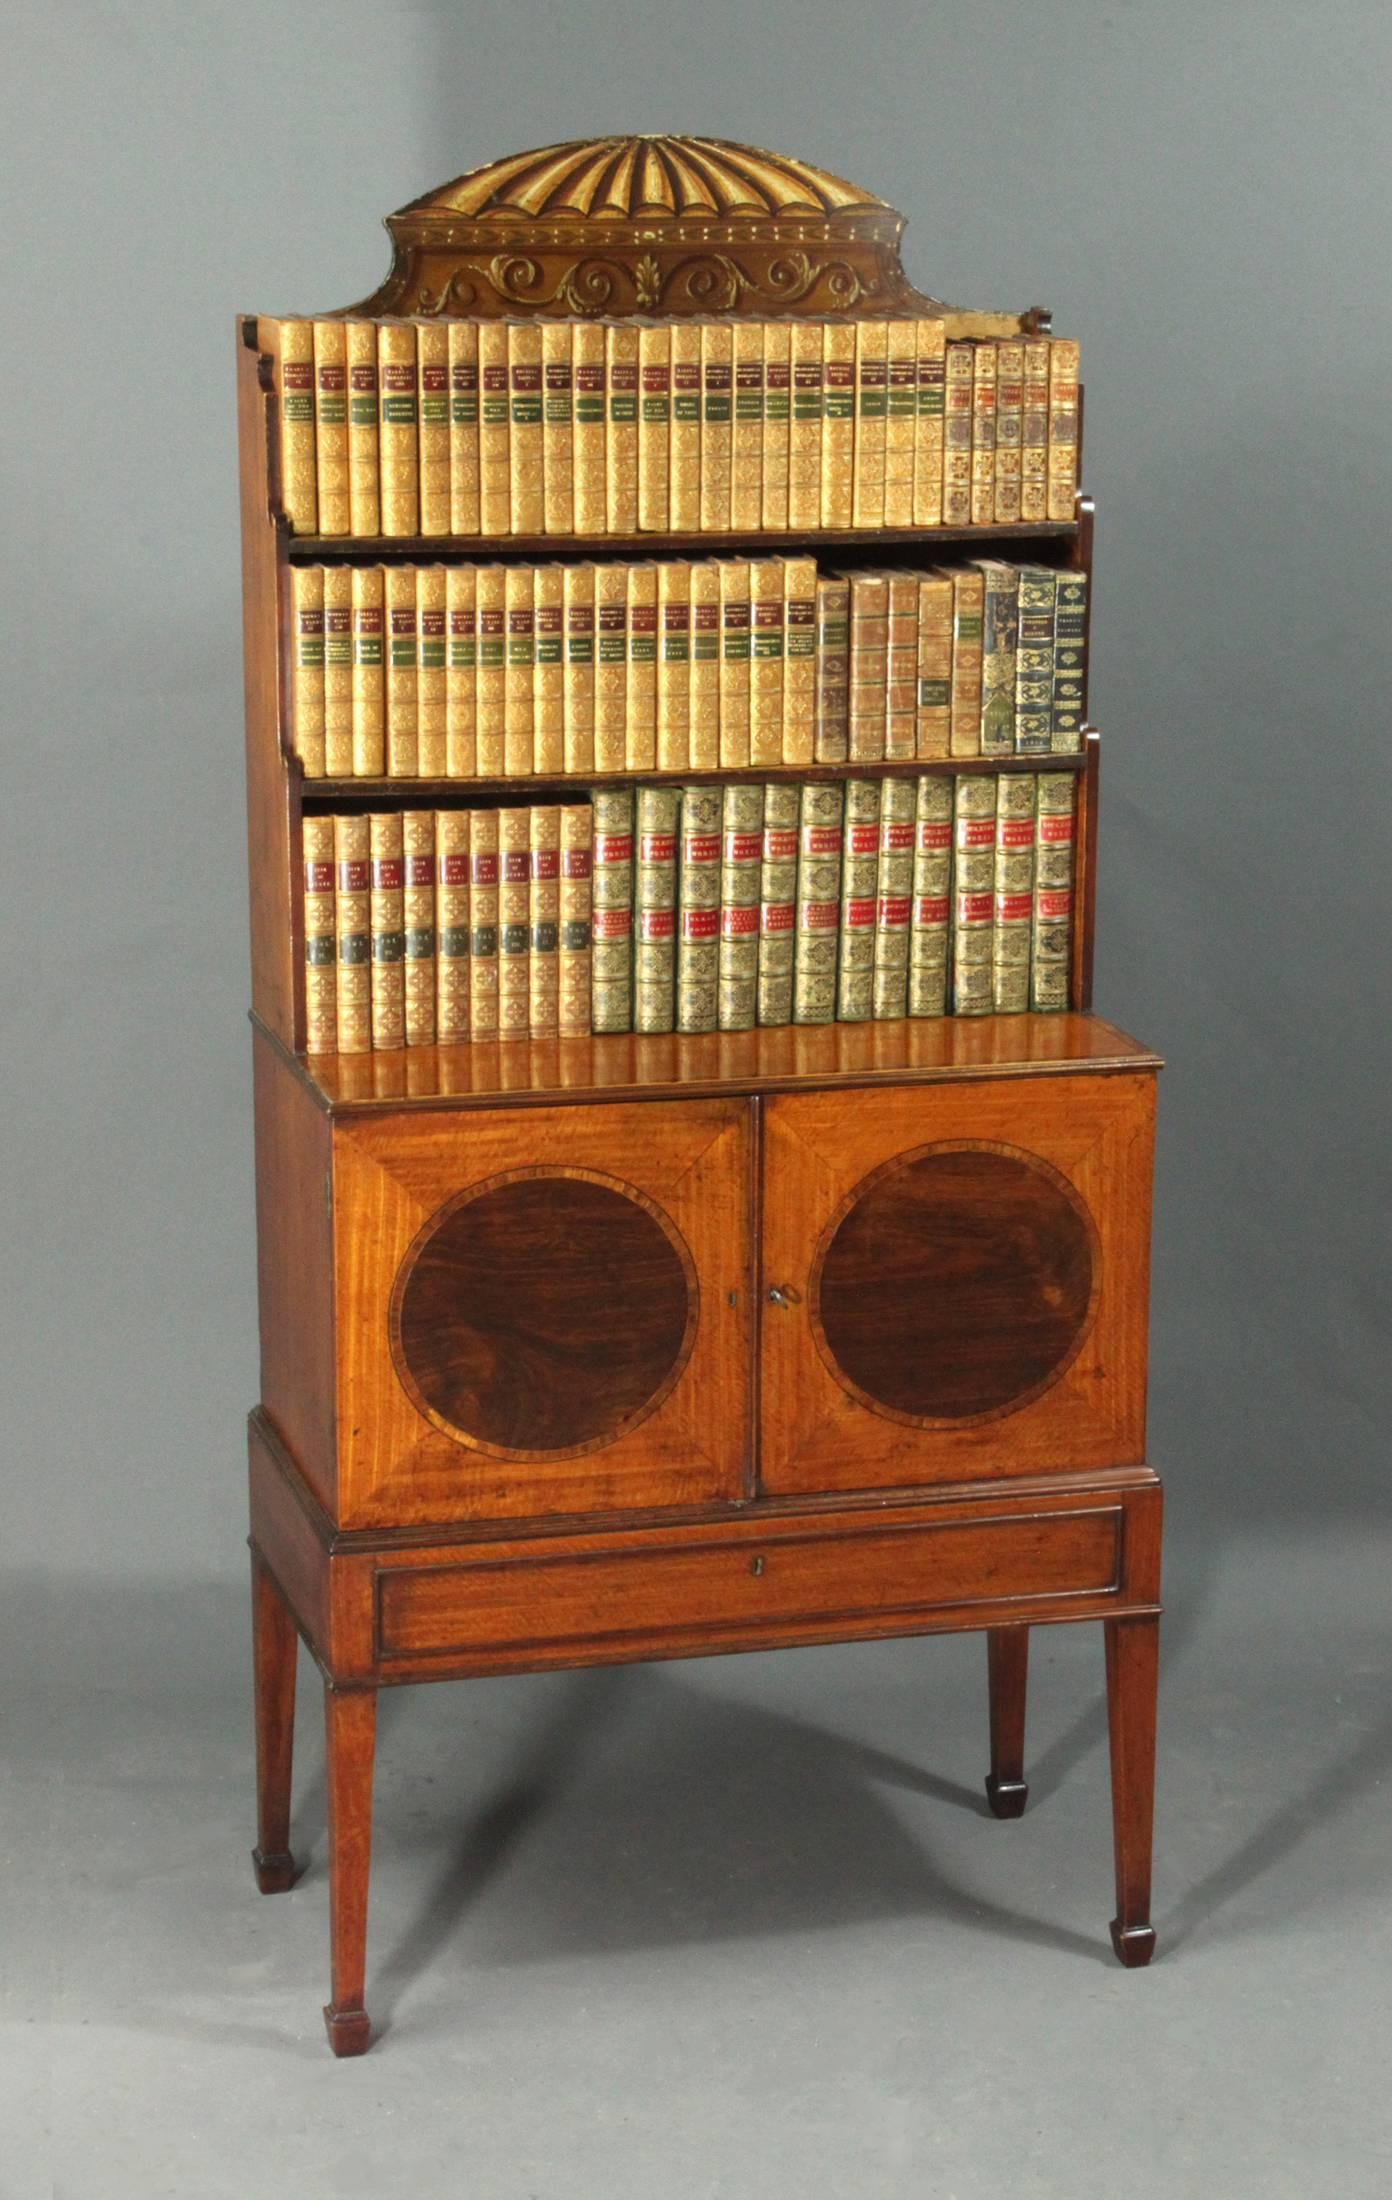 Painted George III Sheraton Period Antique Satinwood Dwarf Bookcase For Sale